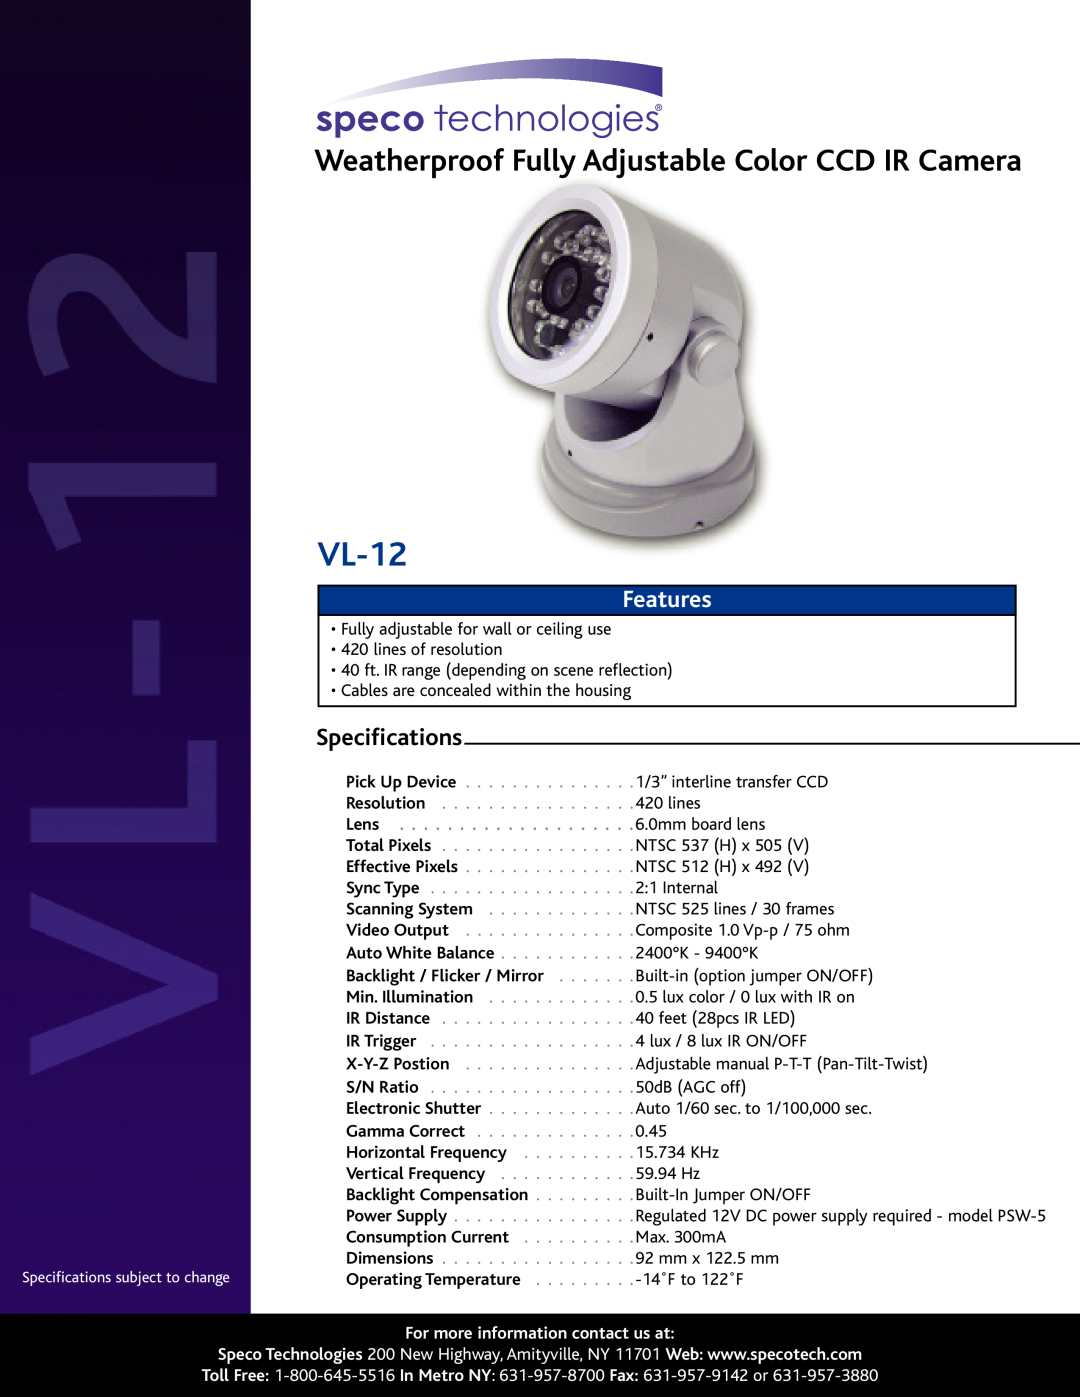 Speco Technologies VL-12 specifications Weatherproof Fully Adjustable Color CCD IR Camera, Features, Specifications, Lens 